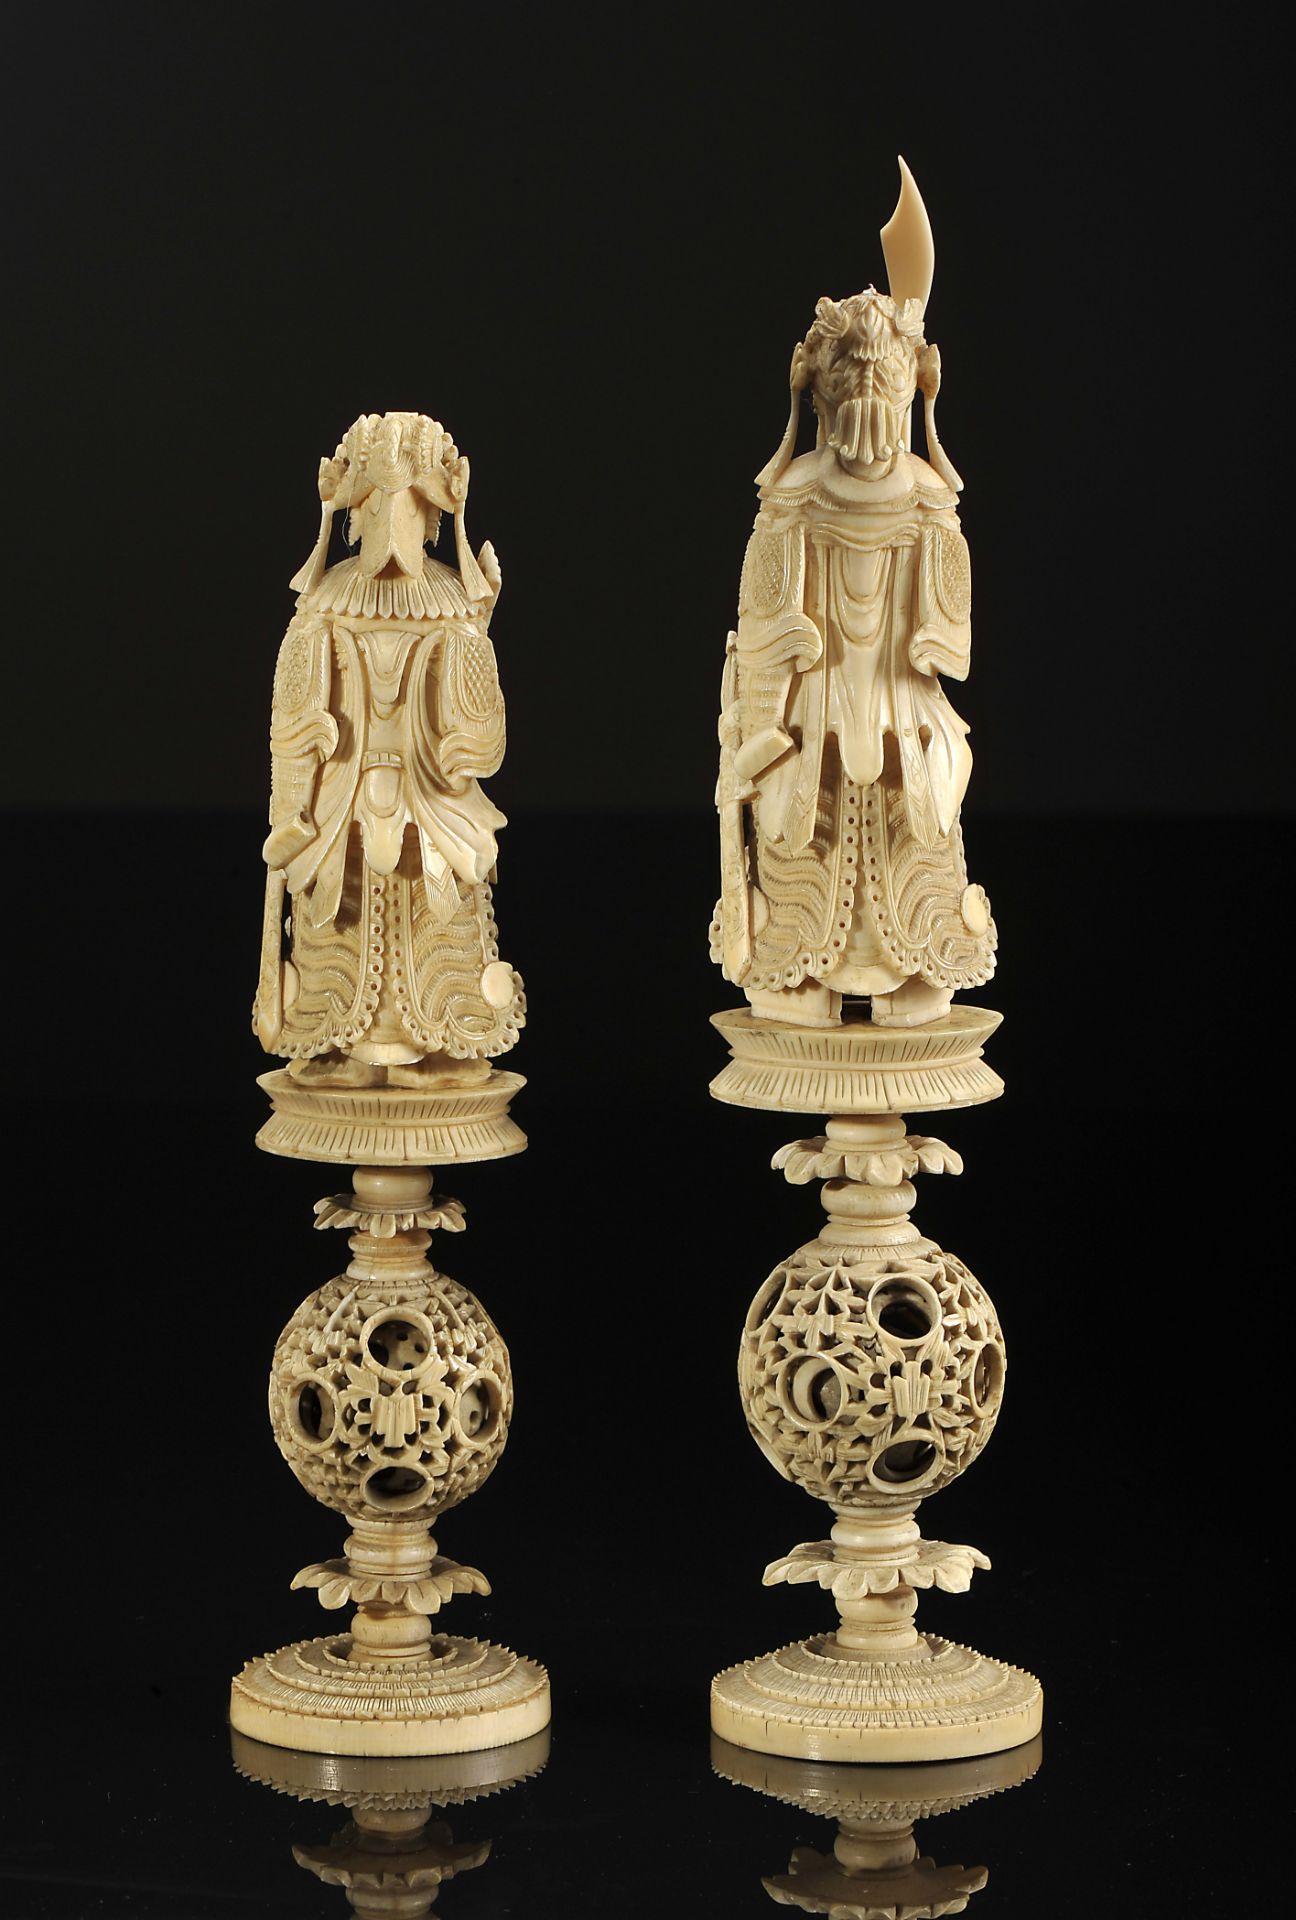 Chess pieces, "Emperor" and "Empress" based on "Ball of happiness" - Image 3 of 4